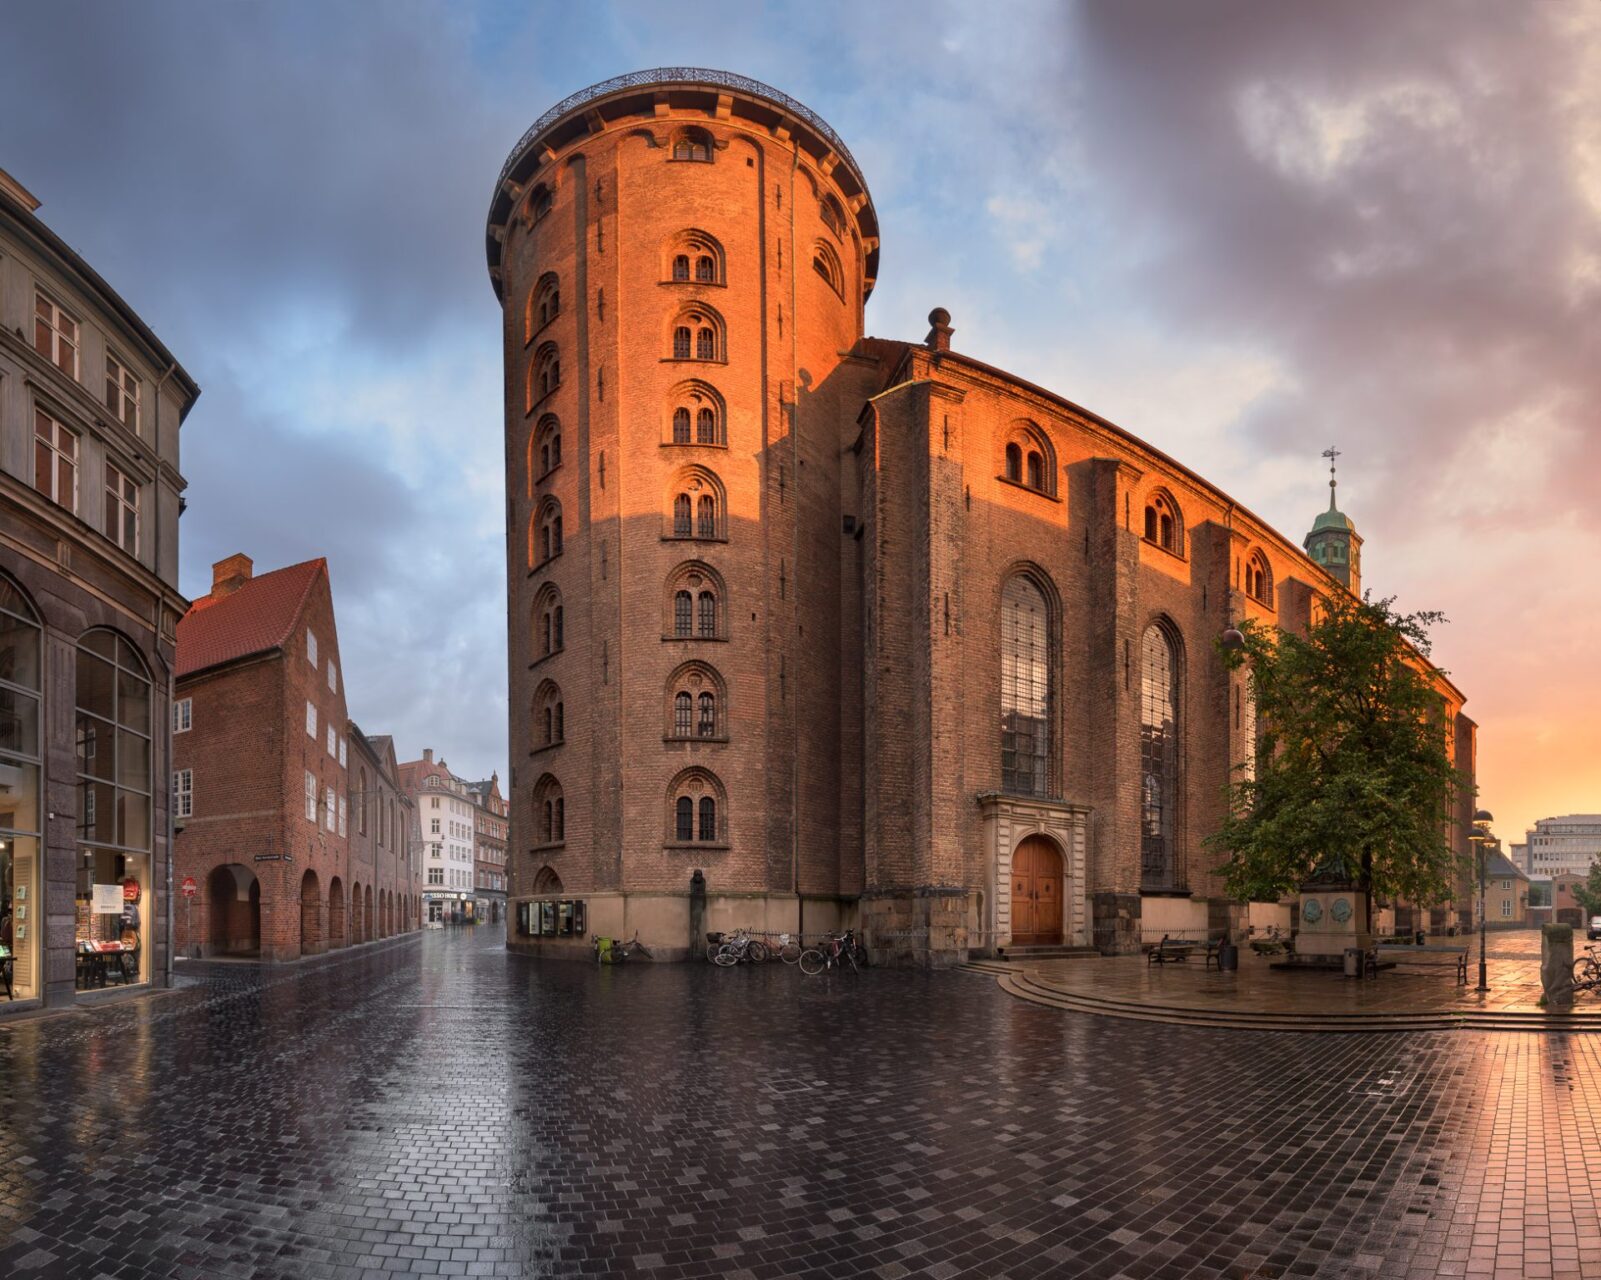 Panorama of the Round Tower in the Morning, Copenhagen, Denmark